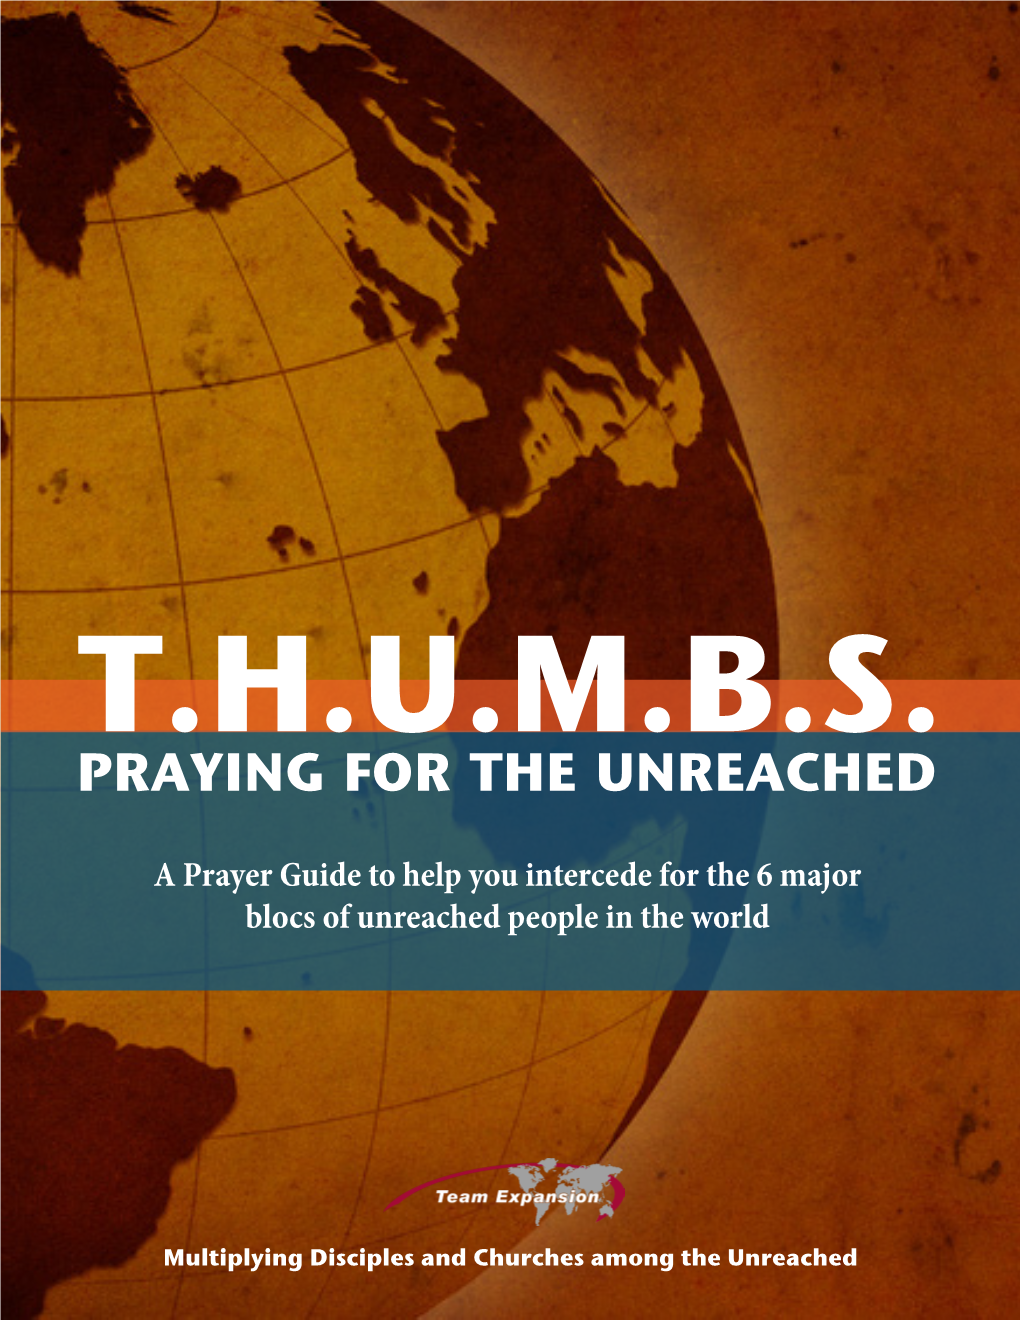 Praying for the Unreached!